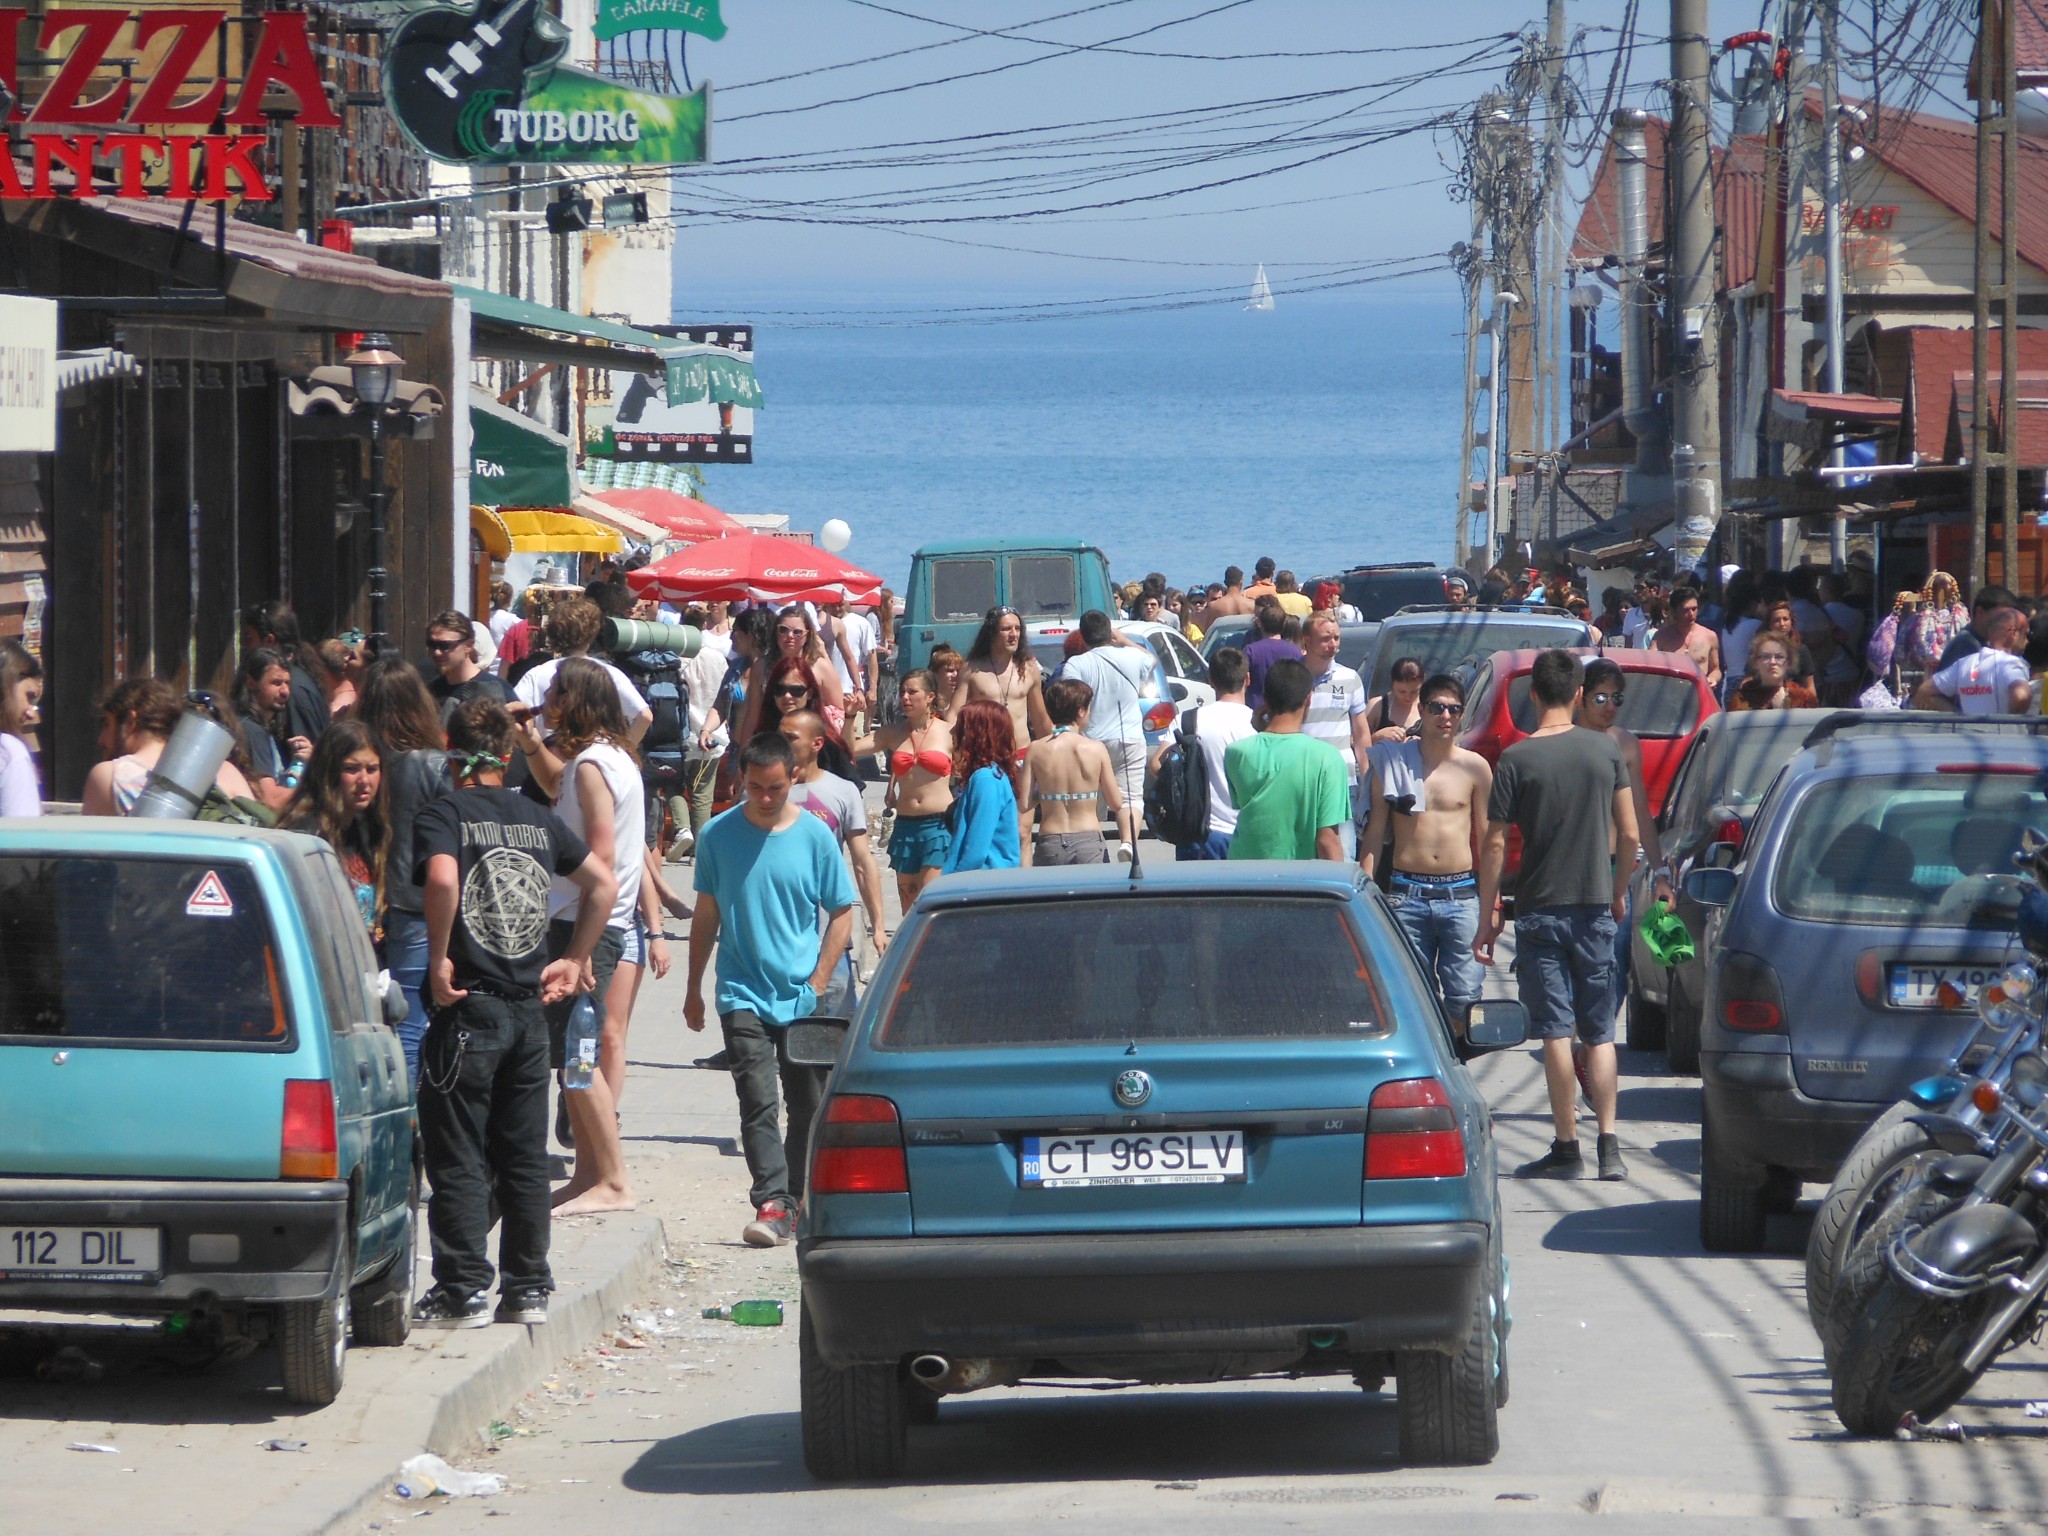 Vama Veche has long been a getaway for “free spirits” and families alike. (Image: Dimiter Kenarov)